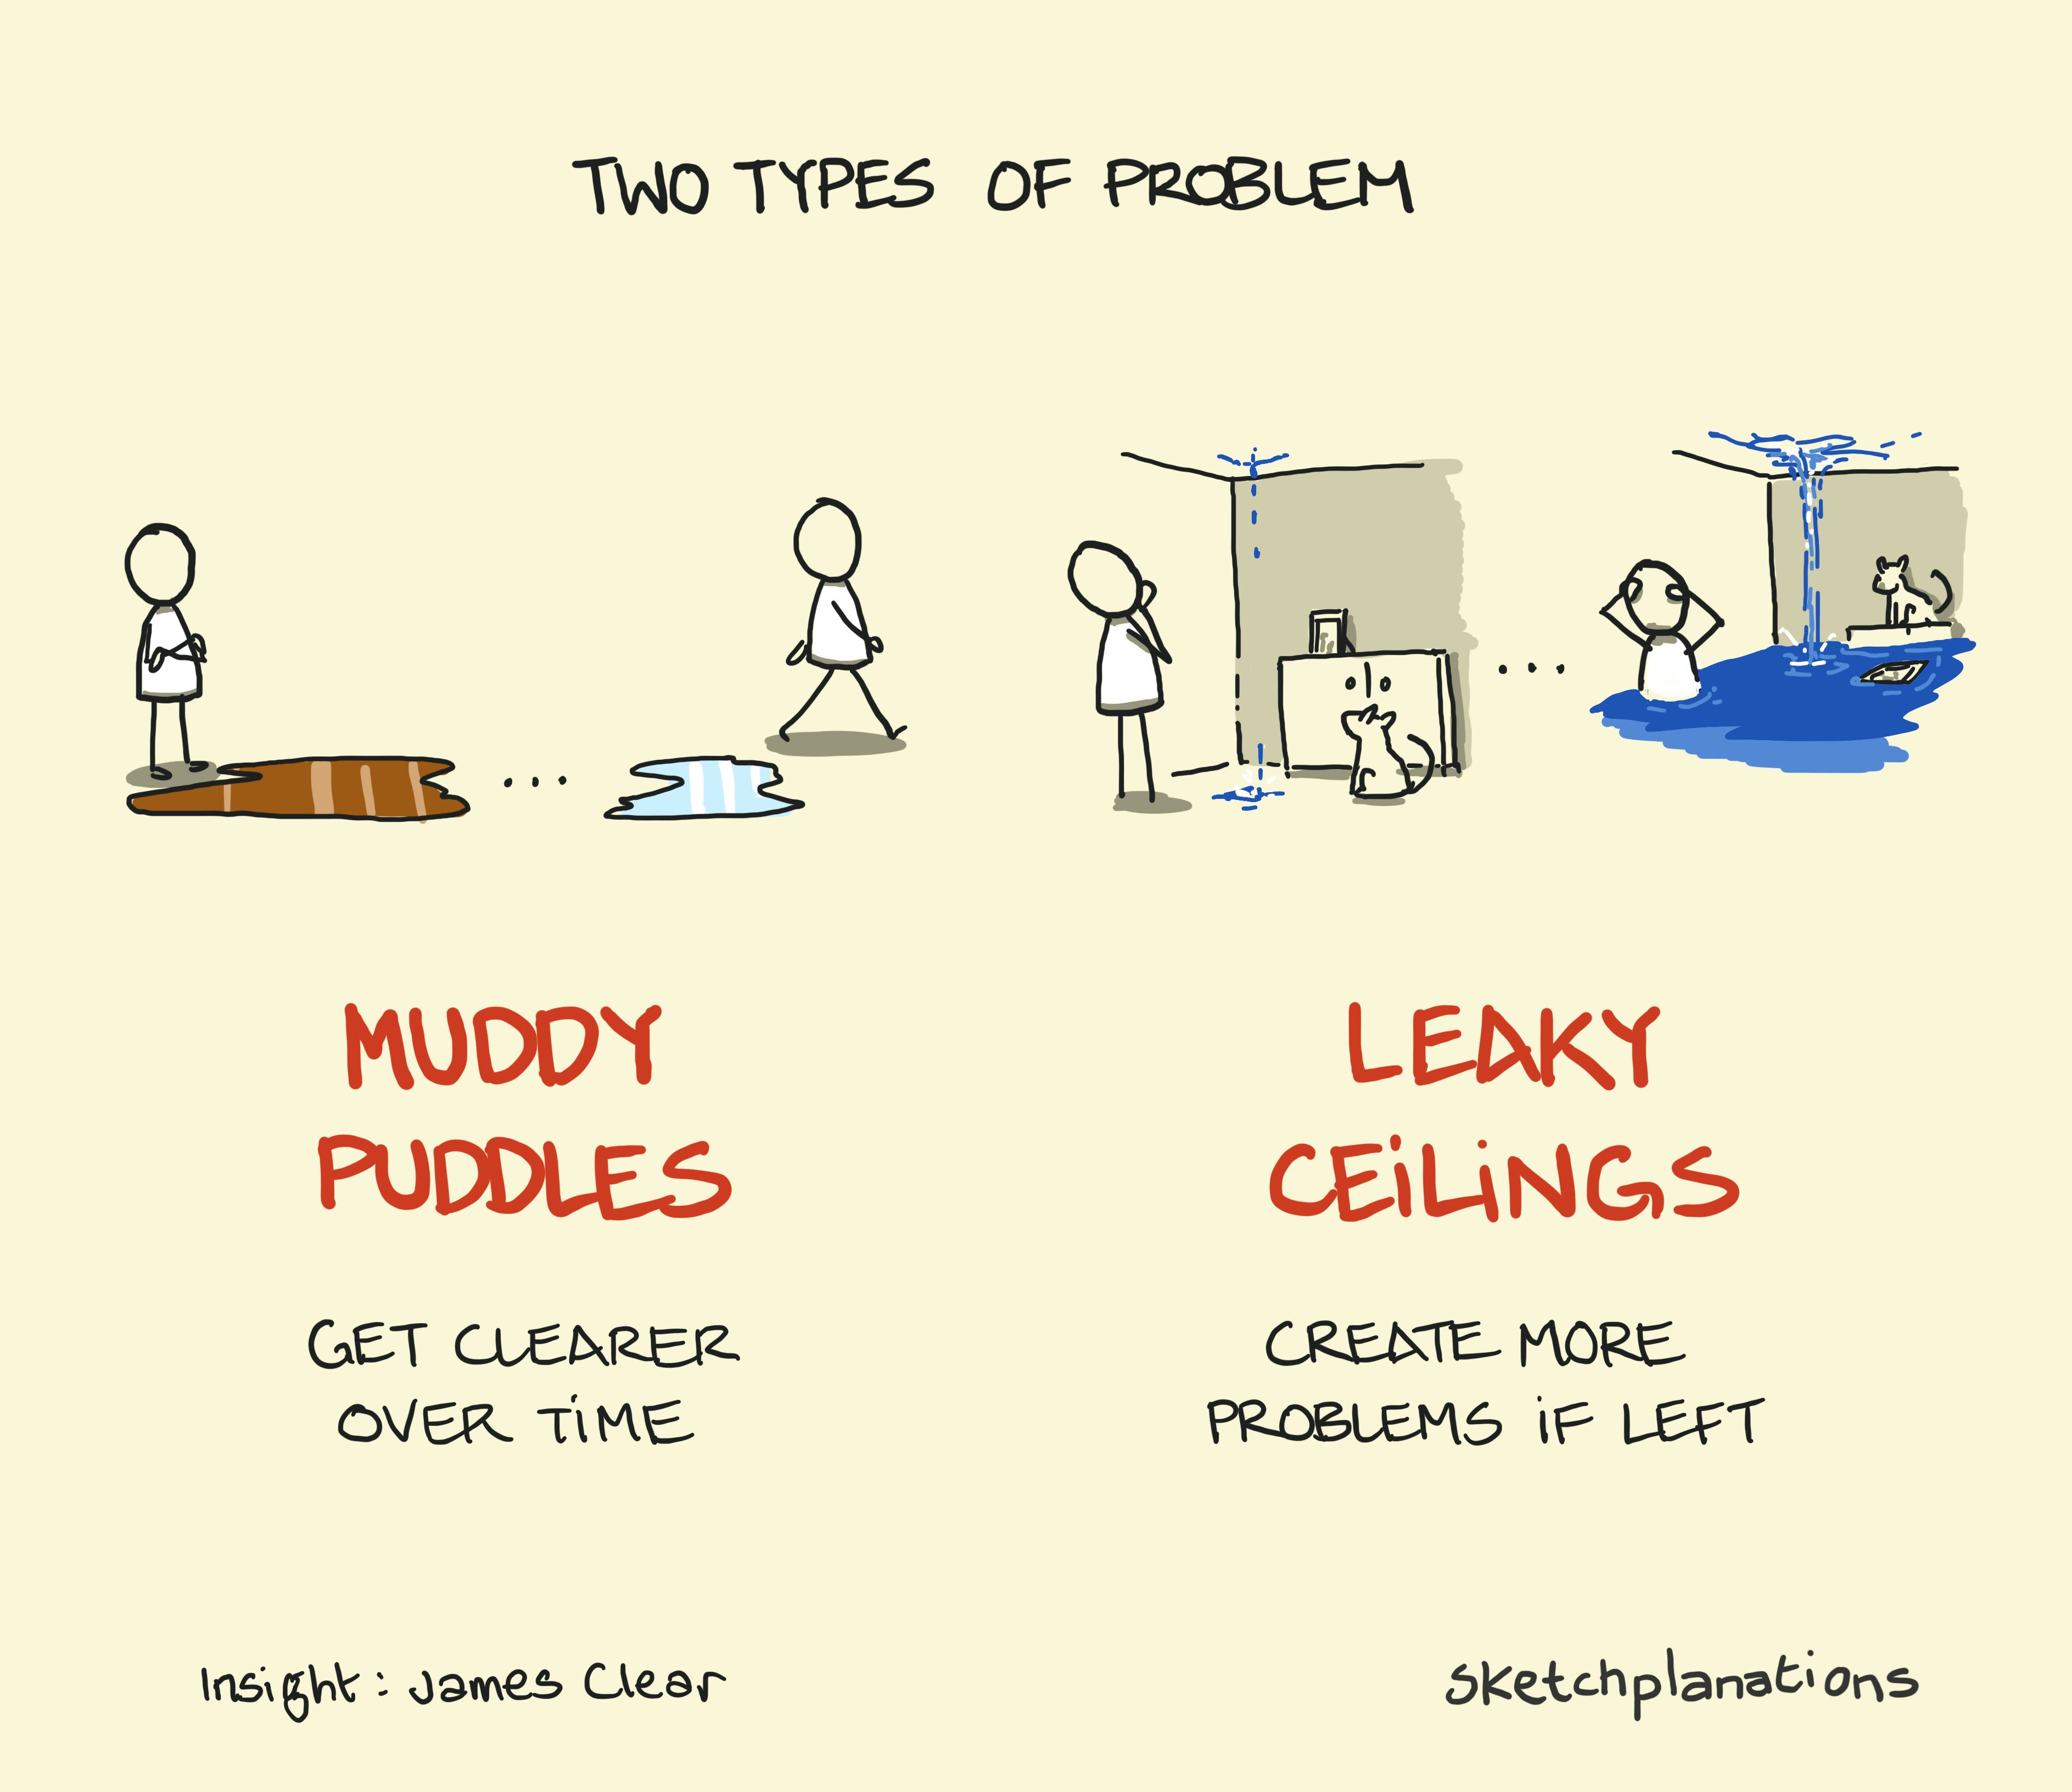 Muddy puddle leaky ceilings - James Clear's model of two types of problems